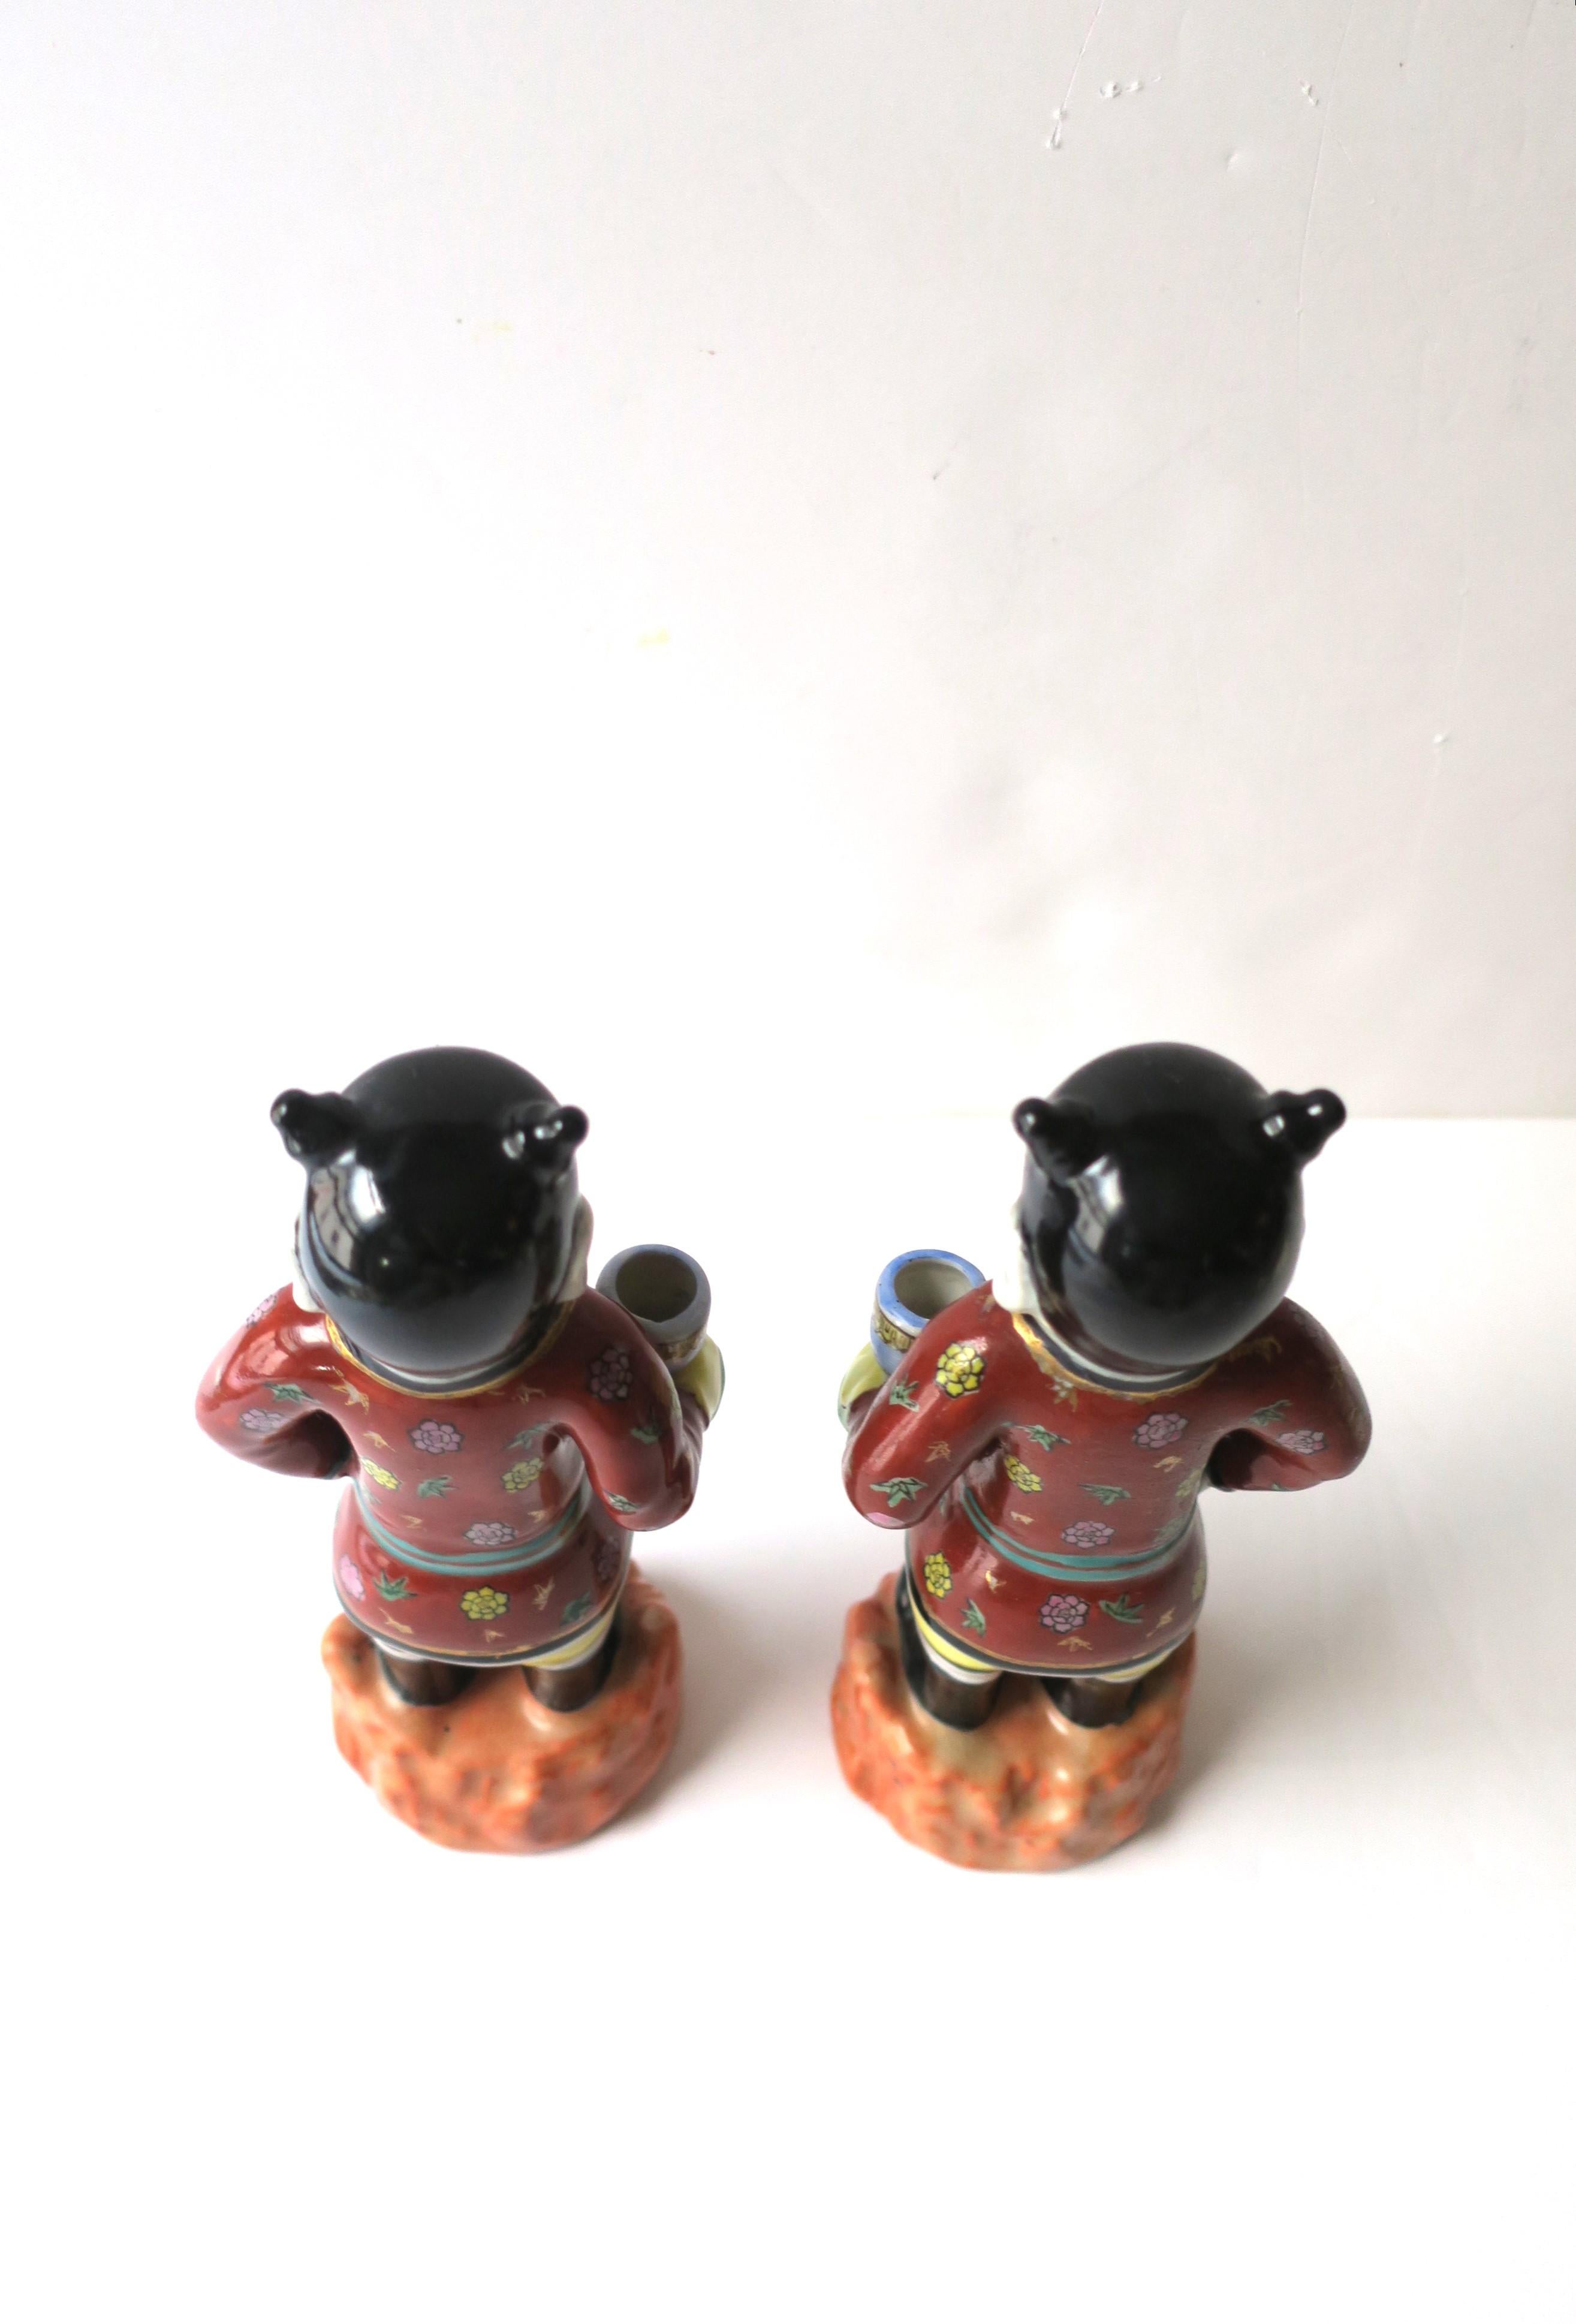 Chinoiserie Style Ceramic Male Figures Hand Painted Decorative Objects, Pair For Sale 4